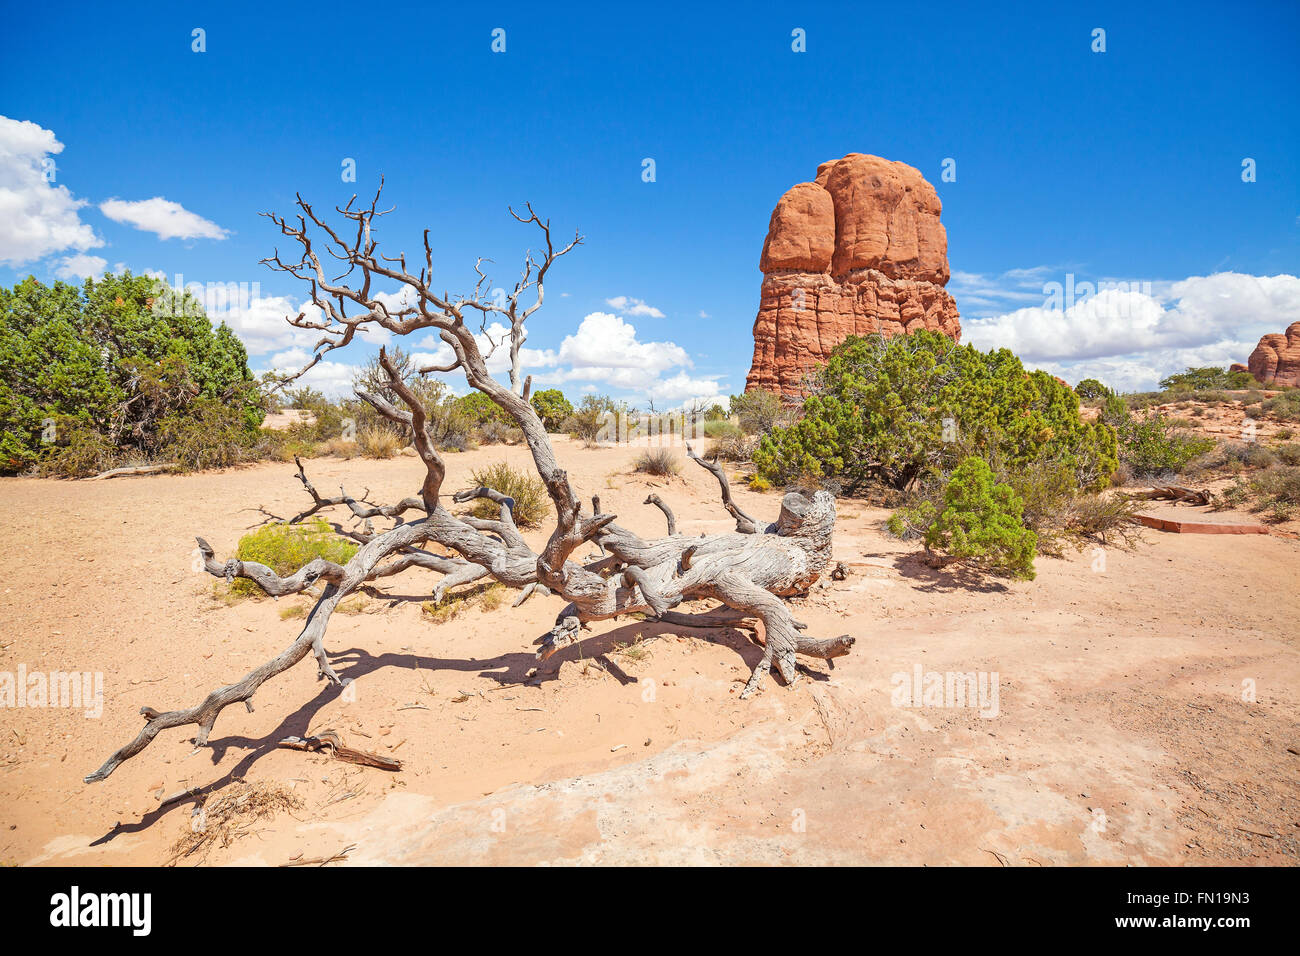 Wilderness and rock formations in Arches National Park, USA. Stock Photo